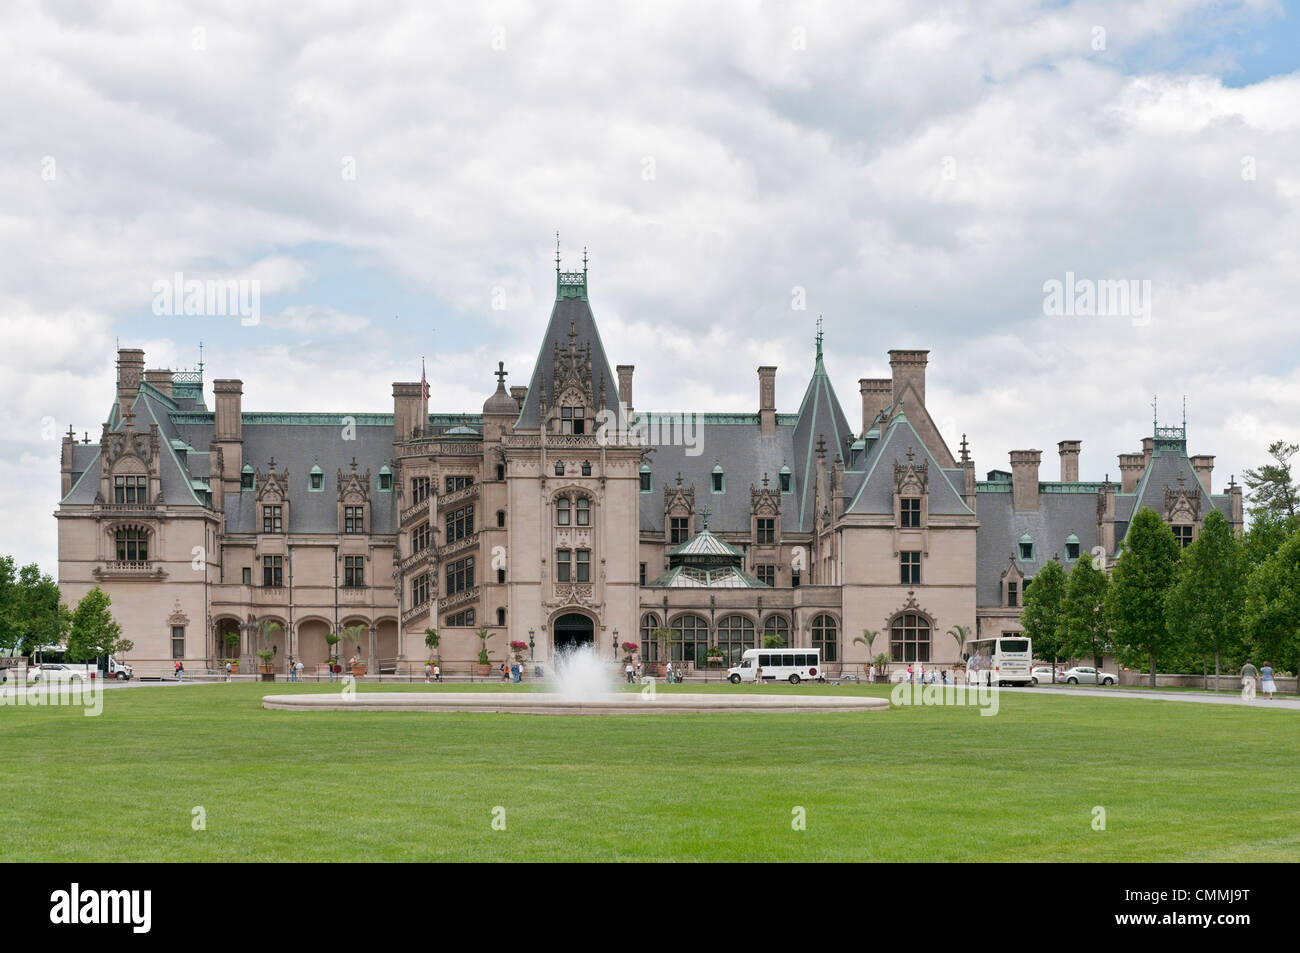 North Carolina, Asheville, Biltmore House, George W. Vanderbilt's 250-room French chateau completed in 1895. Stock Photo